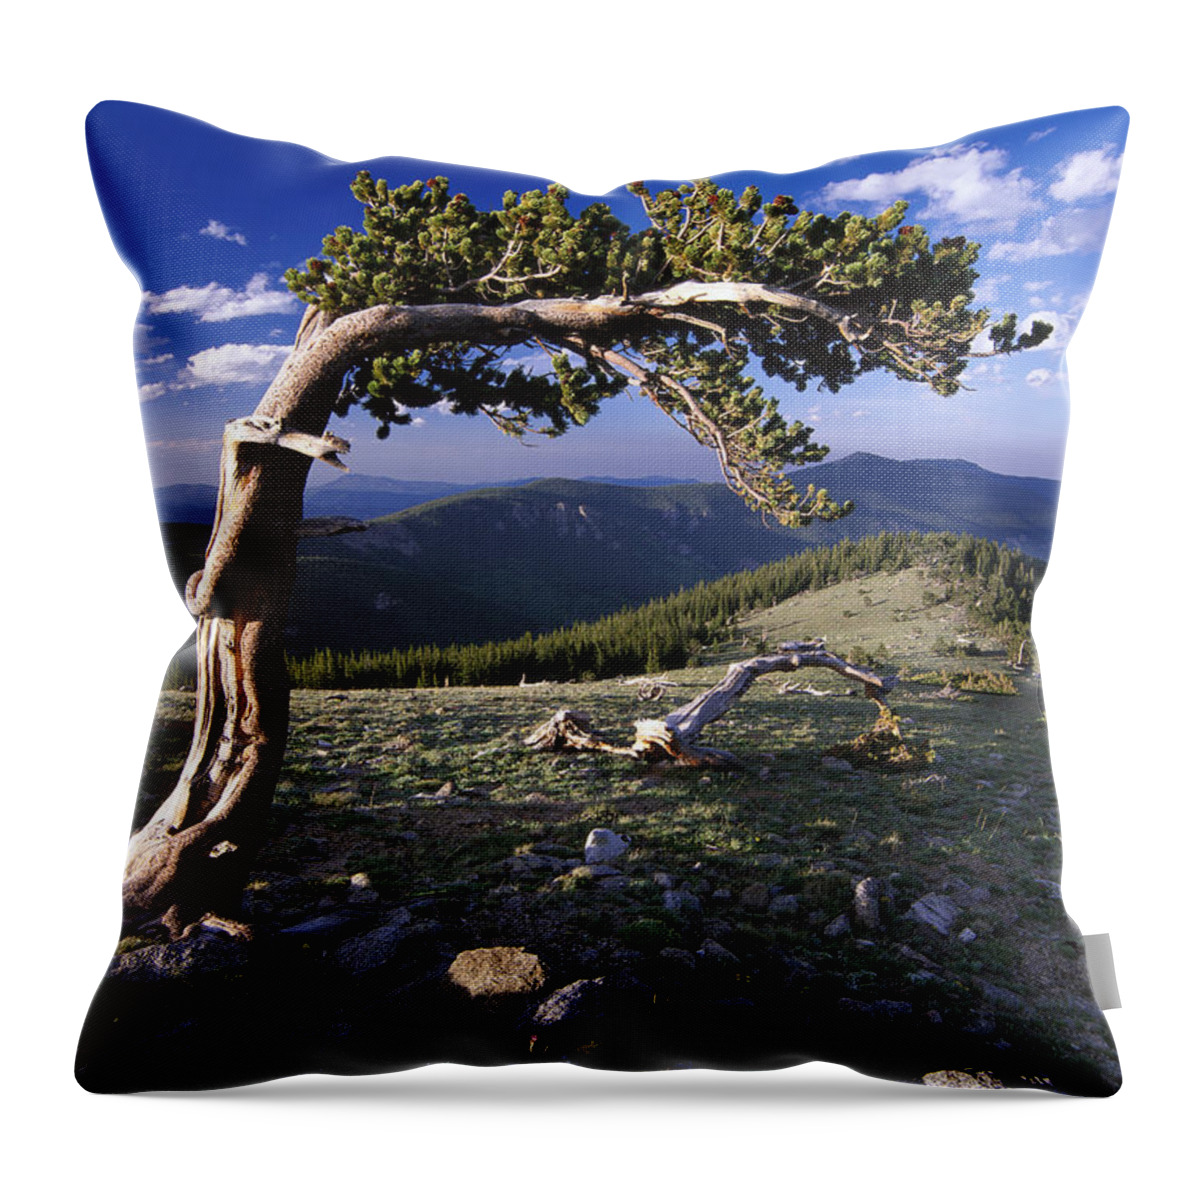 00174844 Throw Pillow featuring the photograph Bristlecone Pine Mt Evans Colorado by Tim Fitzharris